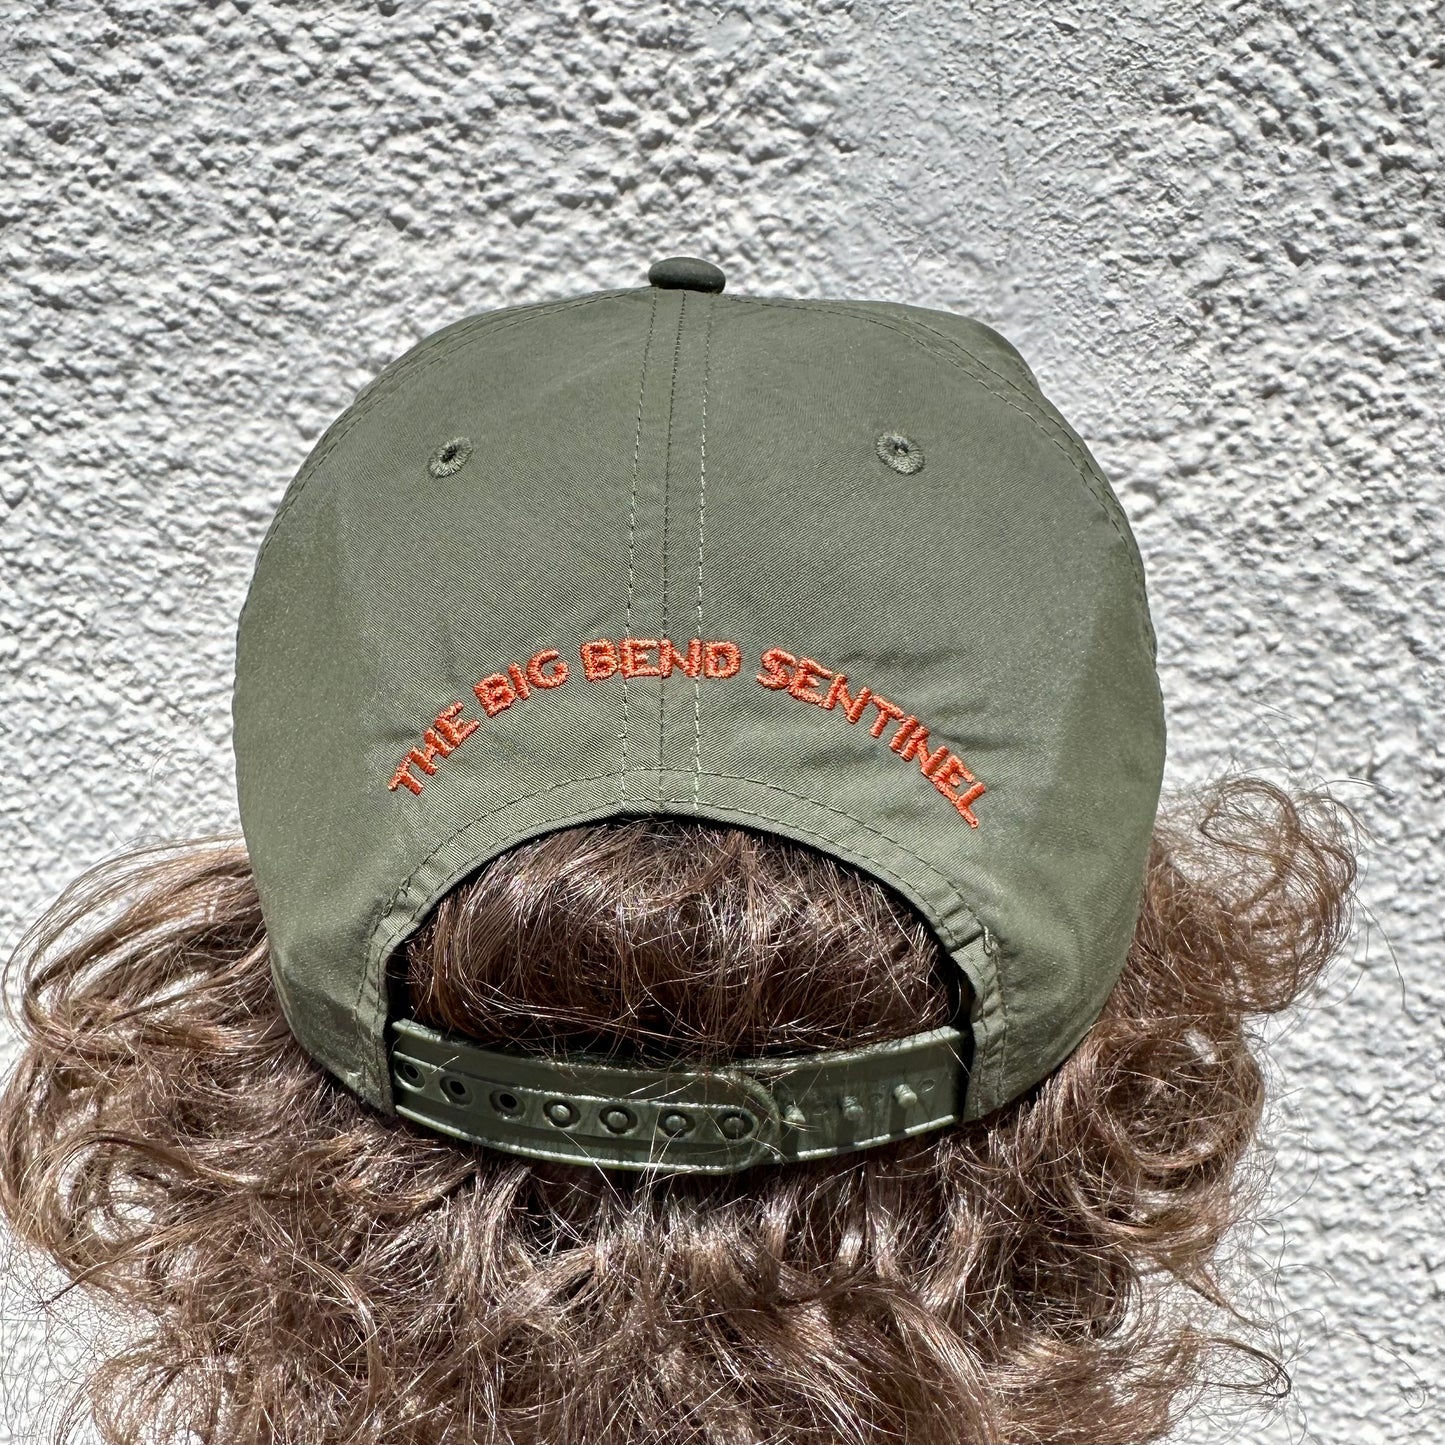 
                  
                    Print Is Not Dead Cap - Army Green
                  
                